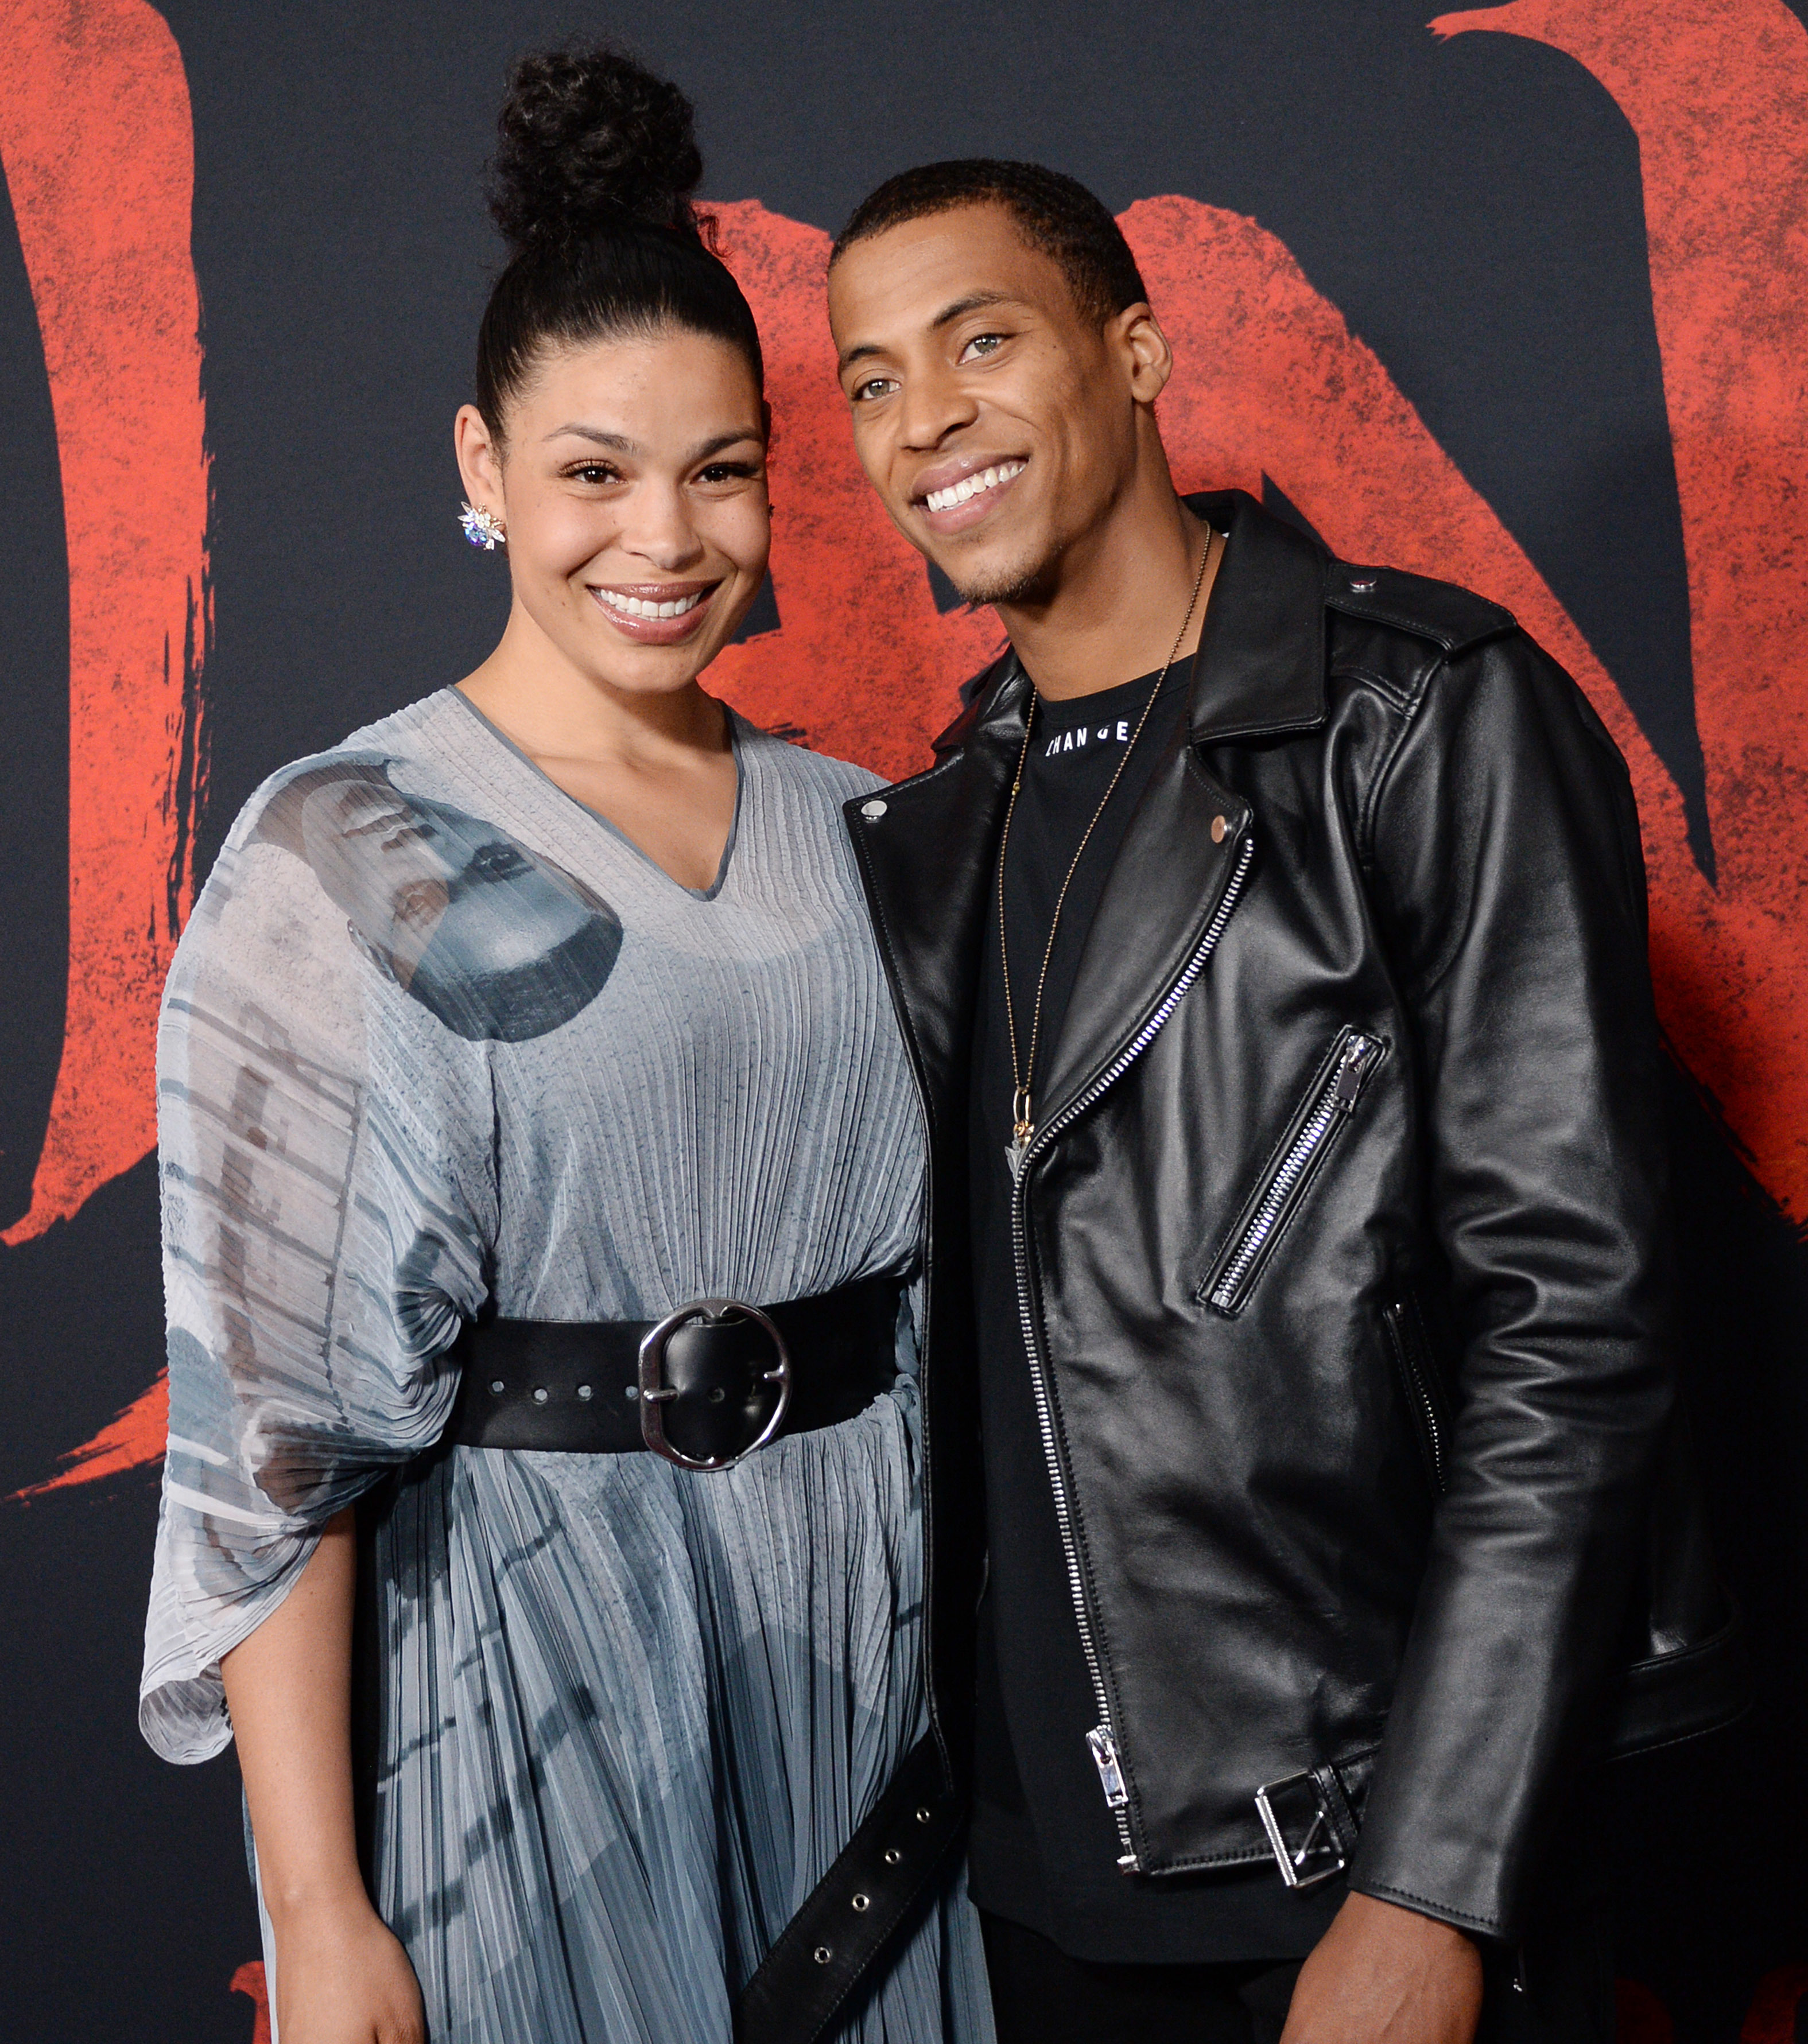 <p>Jordin Sparks and husband Dana Isaiah have their families to thank for inadvertently setting them up. While traveling to Houston for Super Bowl weekend in February 2017, the "American Idol" alum met Dana's family. A few weeks later, he told his mom he was thinking about moving to Hollywood to pursue his modeling career so his mom and Jordin's mom put their kids on a group text. "My mom was trying to get [Jordin] to talk me out of moving to L.A. because she's experienced the industry out here," he told People magazine in November. "It wasn't like, 'We want you guys to date.'" But the two soon realized they had a connection. According to People, they bonded over their close families and Christian faith and when Dana flew to L.A. for an agency meeting, he finally met Jordin in person over Easter weekend. She fell hard and fast. "A couple days after we had actually met, I was like in my head, 'That's going to be my husband! That's my husband right there,'" she told People. "When I'm with him, I feel comfort and safety and calm and peace, and those aren't things that I normally felt. So it was a little wake-up call for me." They <a href="http://www.wonderwall.com/news/icymi-celeb-news-nov-12-17-2017-3010543.gallery">eloped</a> that July while vacationing in Hawaii with friends and welcomed their first child, son D.J., in May 2018.</p>